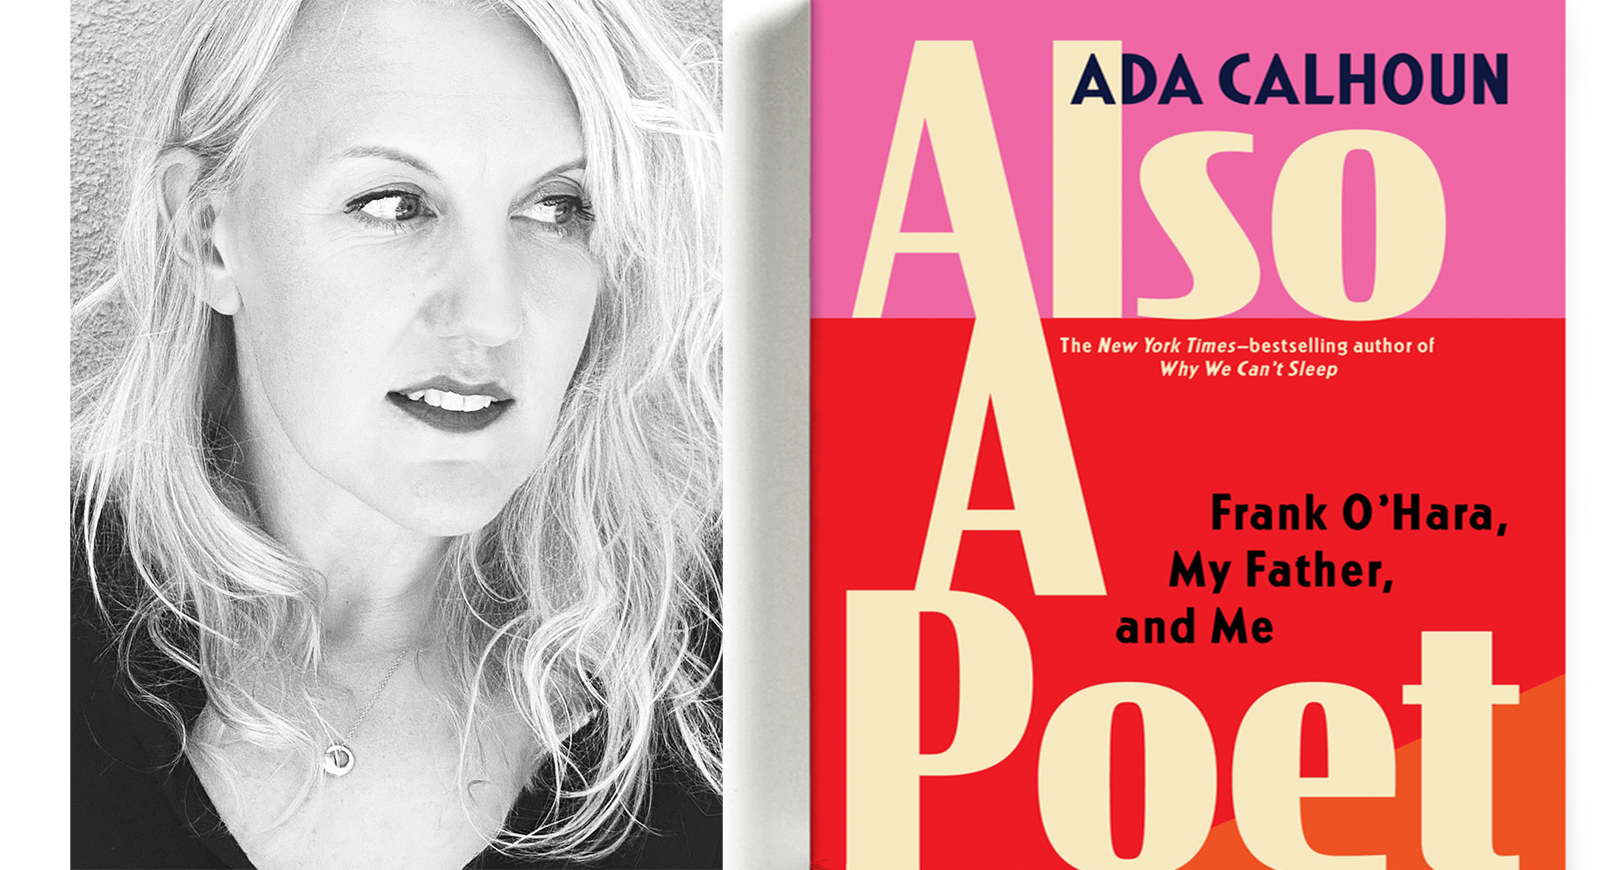 Photo of Ada Calhoun by Kathleen Hanna, 2021 and book cover "Also a Poet: Frank O'Hara, My Father, and Me"